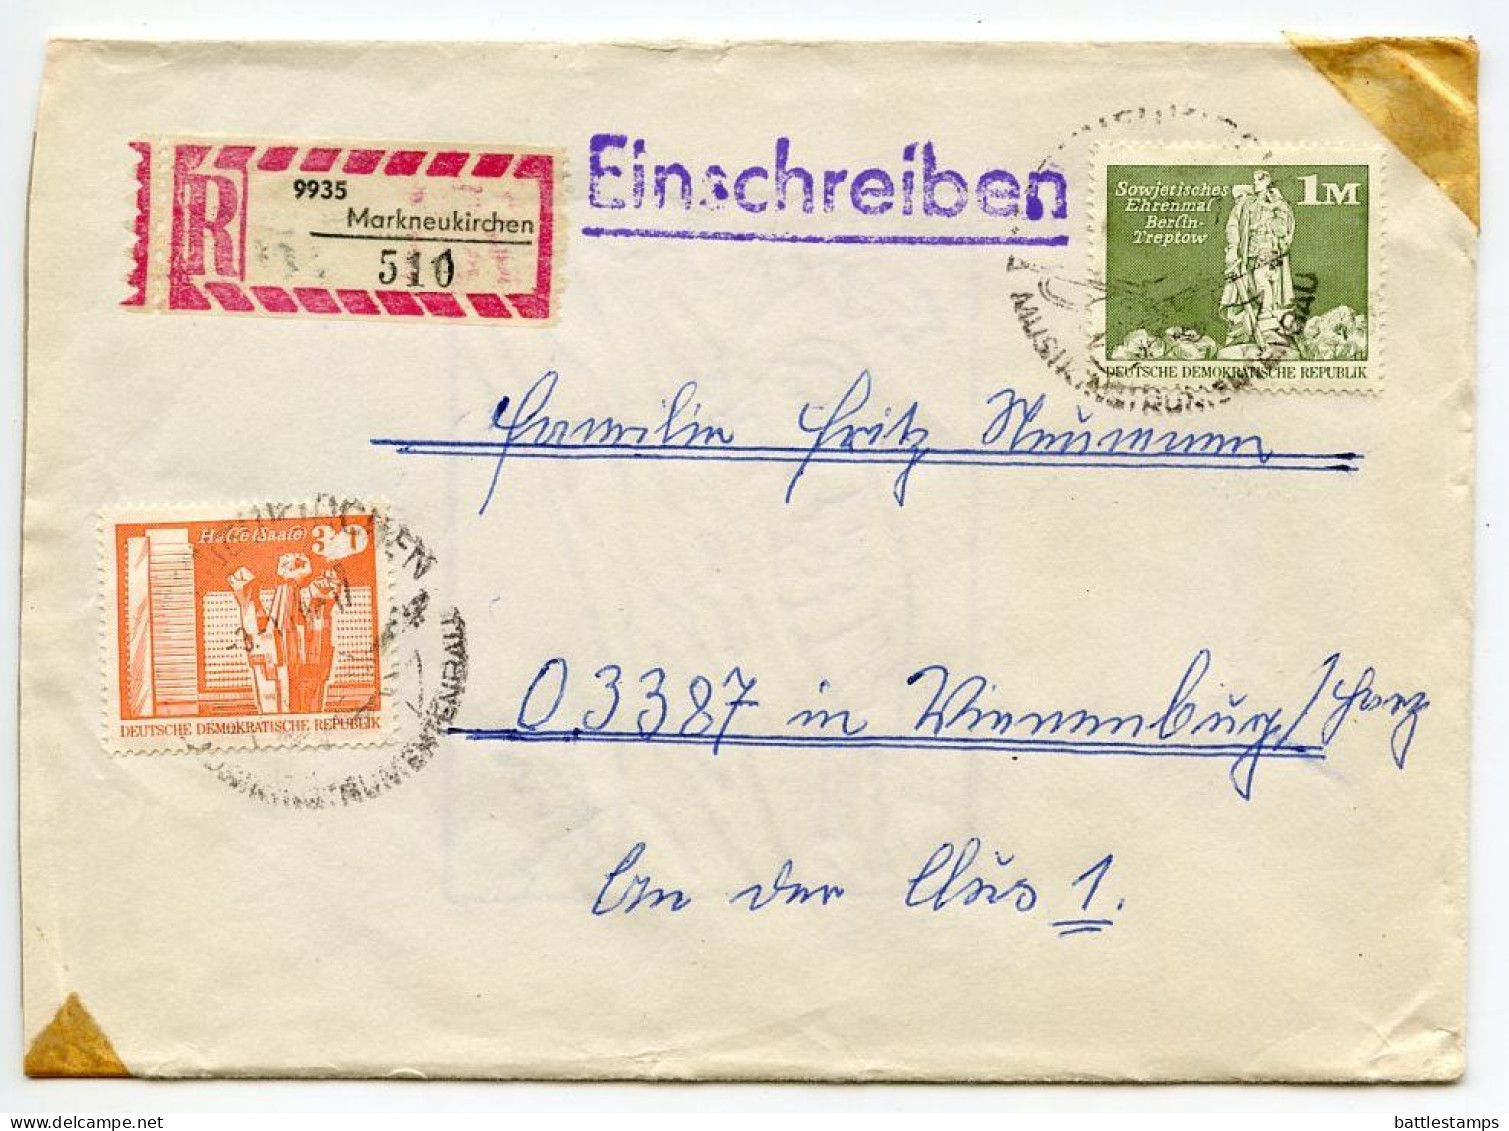 Germany East 1970's Registered Cover; Markneukirchen To Vienenburg; 30pf. Halle & 1m. Soviet War Memorial Stamps - Covers & Documents